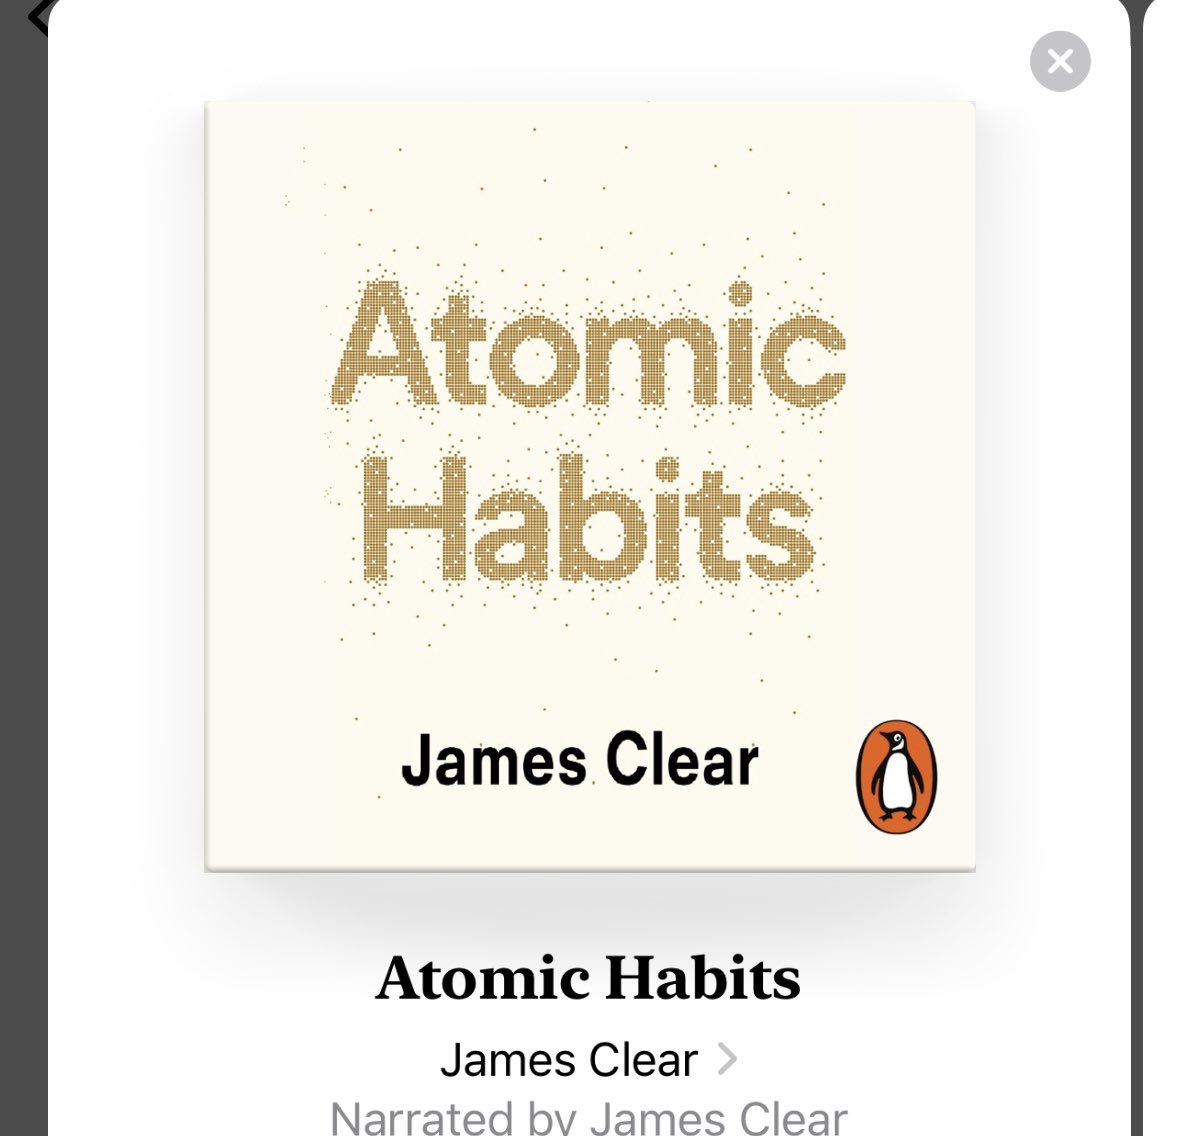 No matter how many times I listen to this audiobook, it never fails to kick my ass into gear. Really lays out the importance of habits, and how 1% improvements are the key to success 👏🏼 If you don’t know, get to know!
#atomichabits #keytosuccess